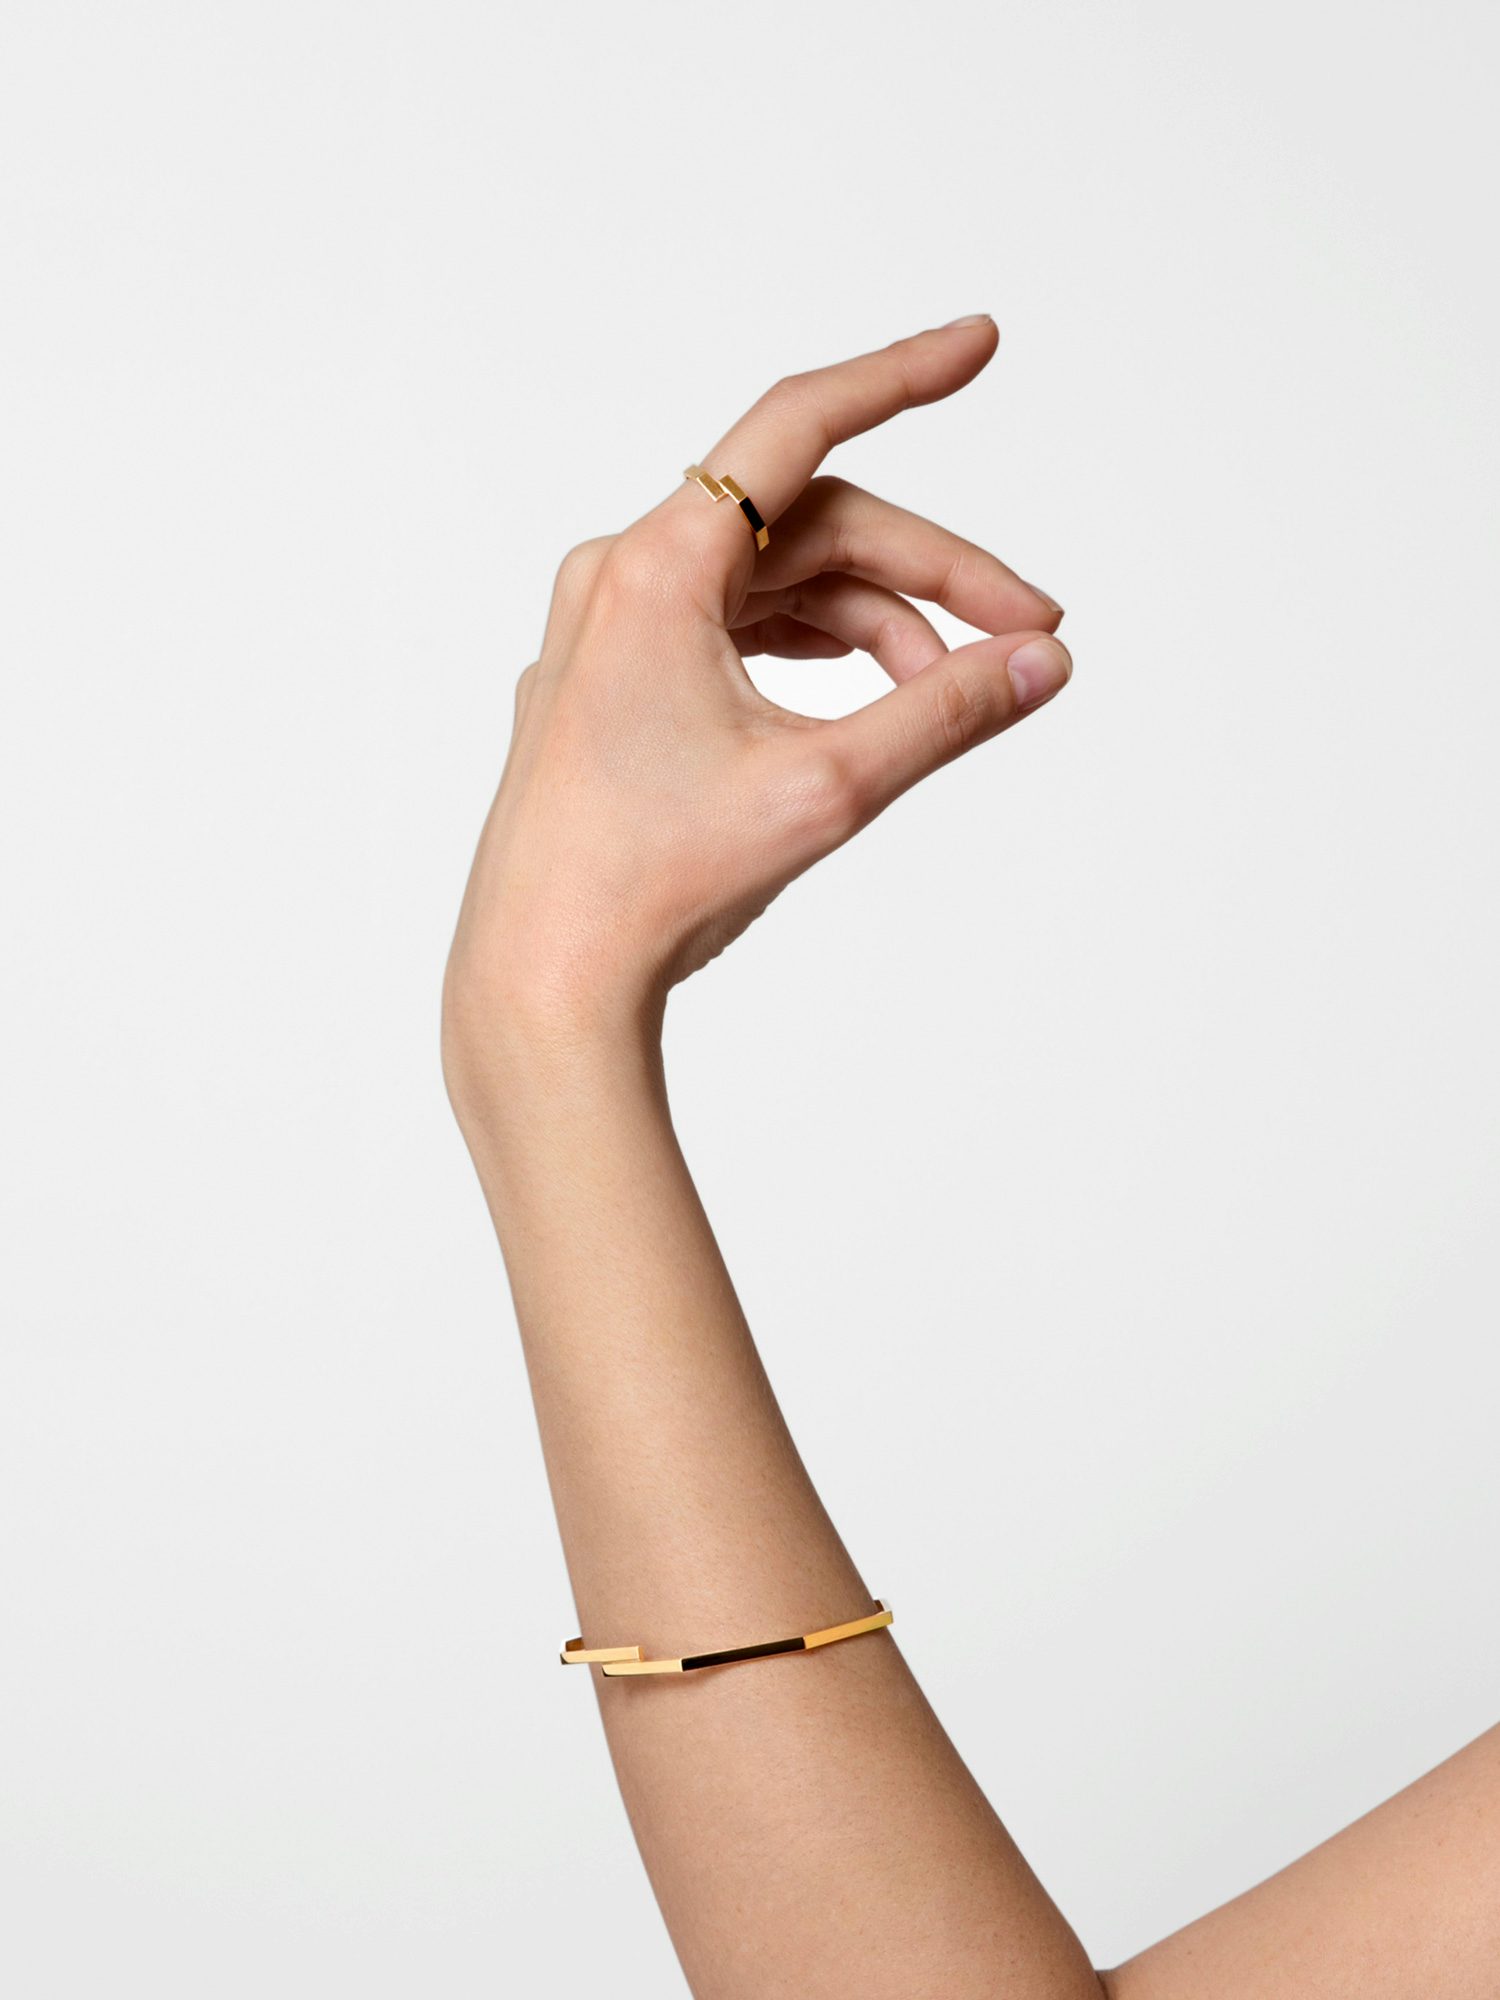 Octogone double bangle in 18k Fairmined ethical yellow gold